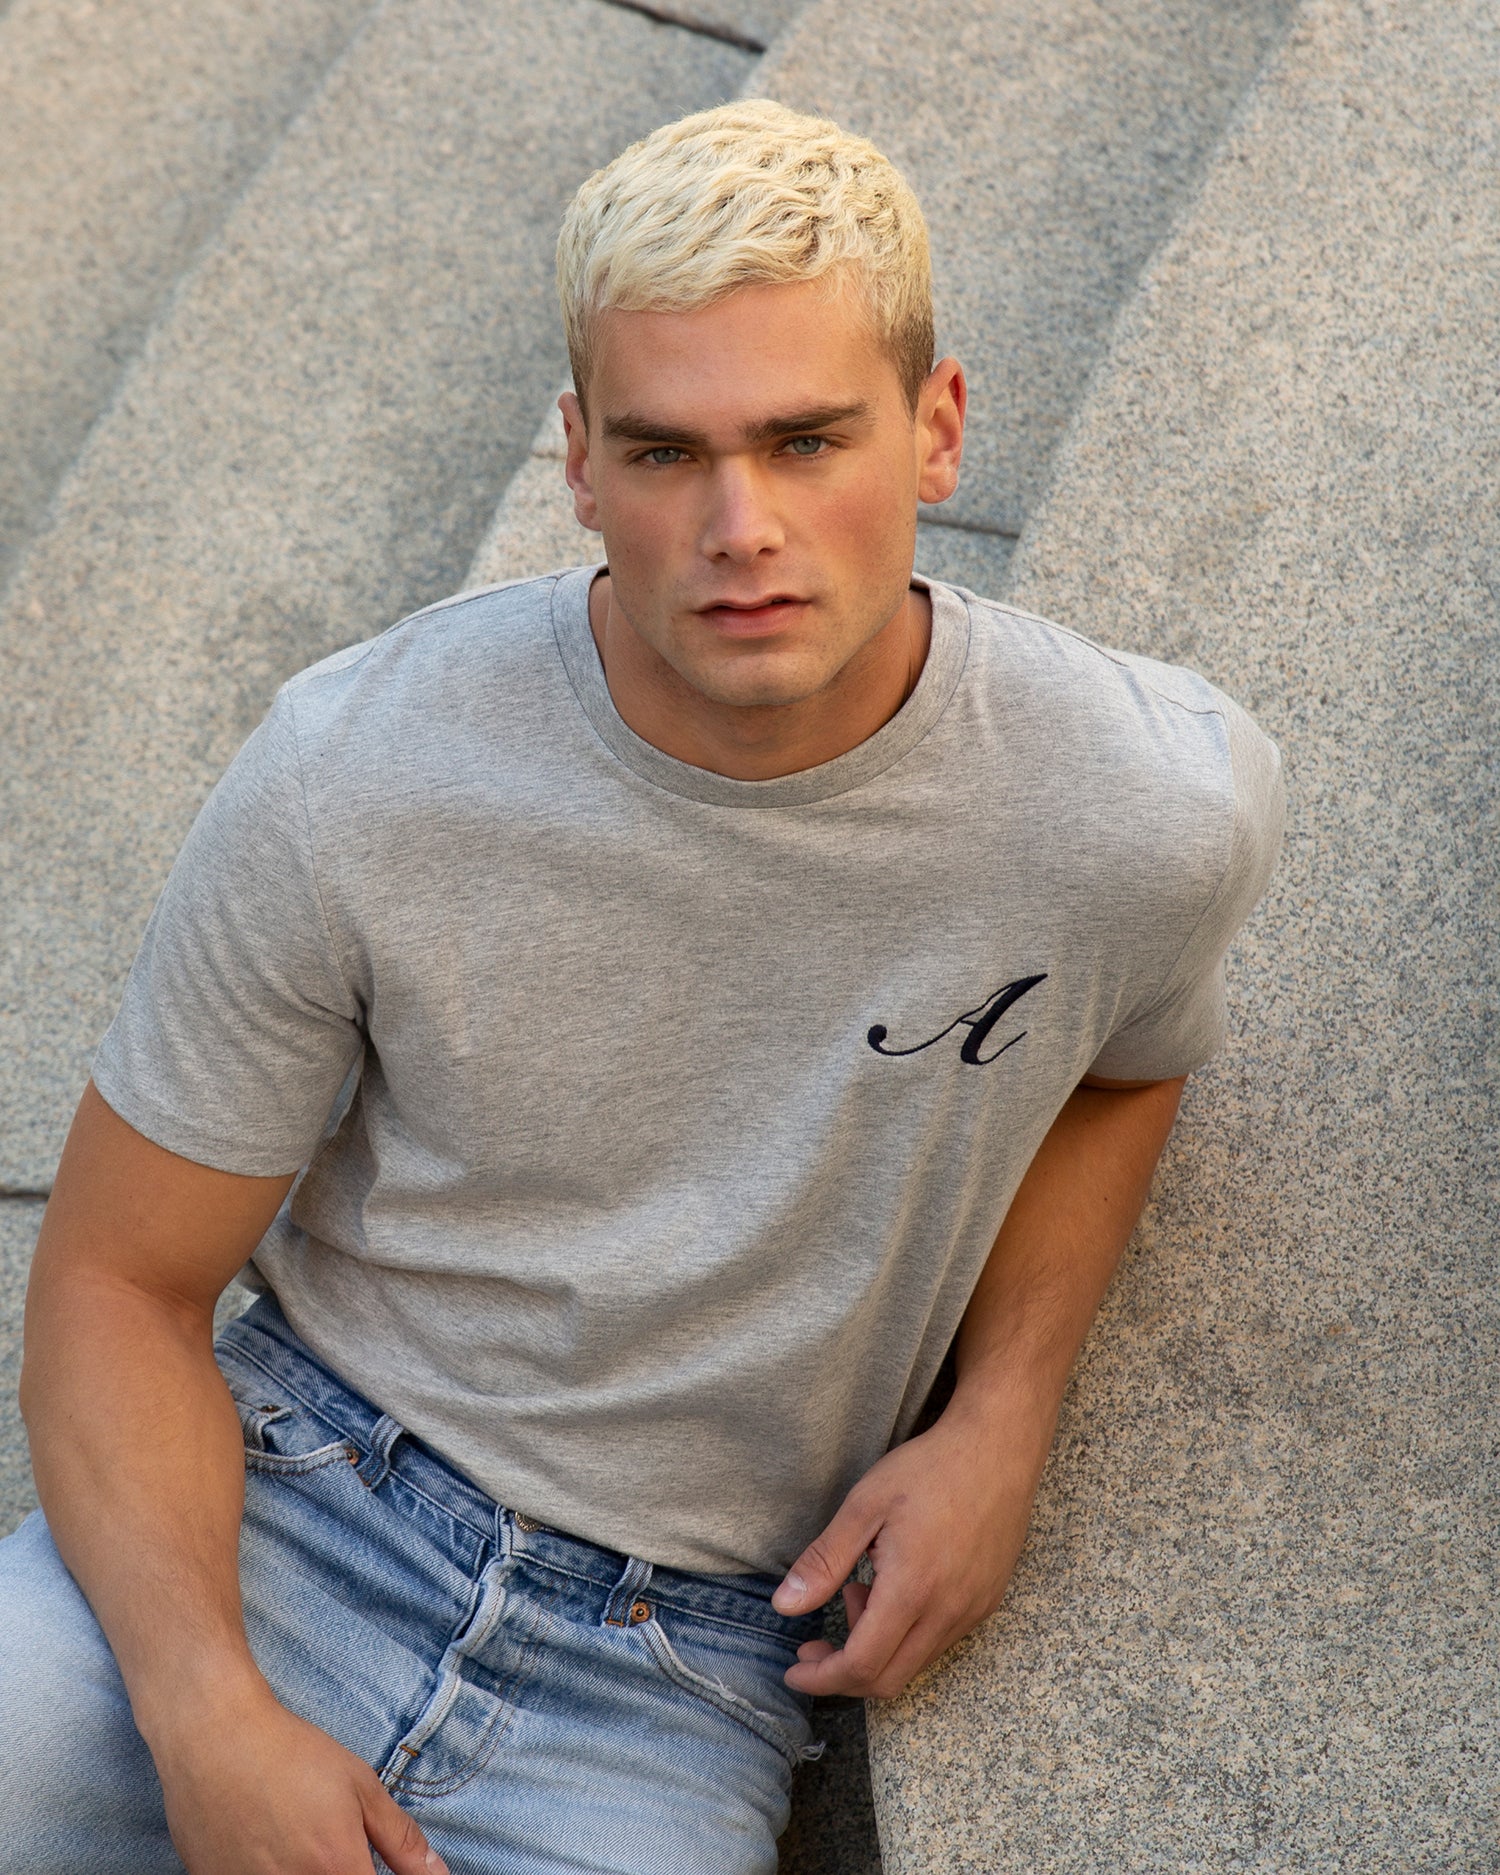 Personalized ANCLADEMAR Grey T-shirt